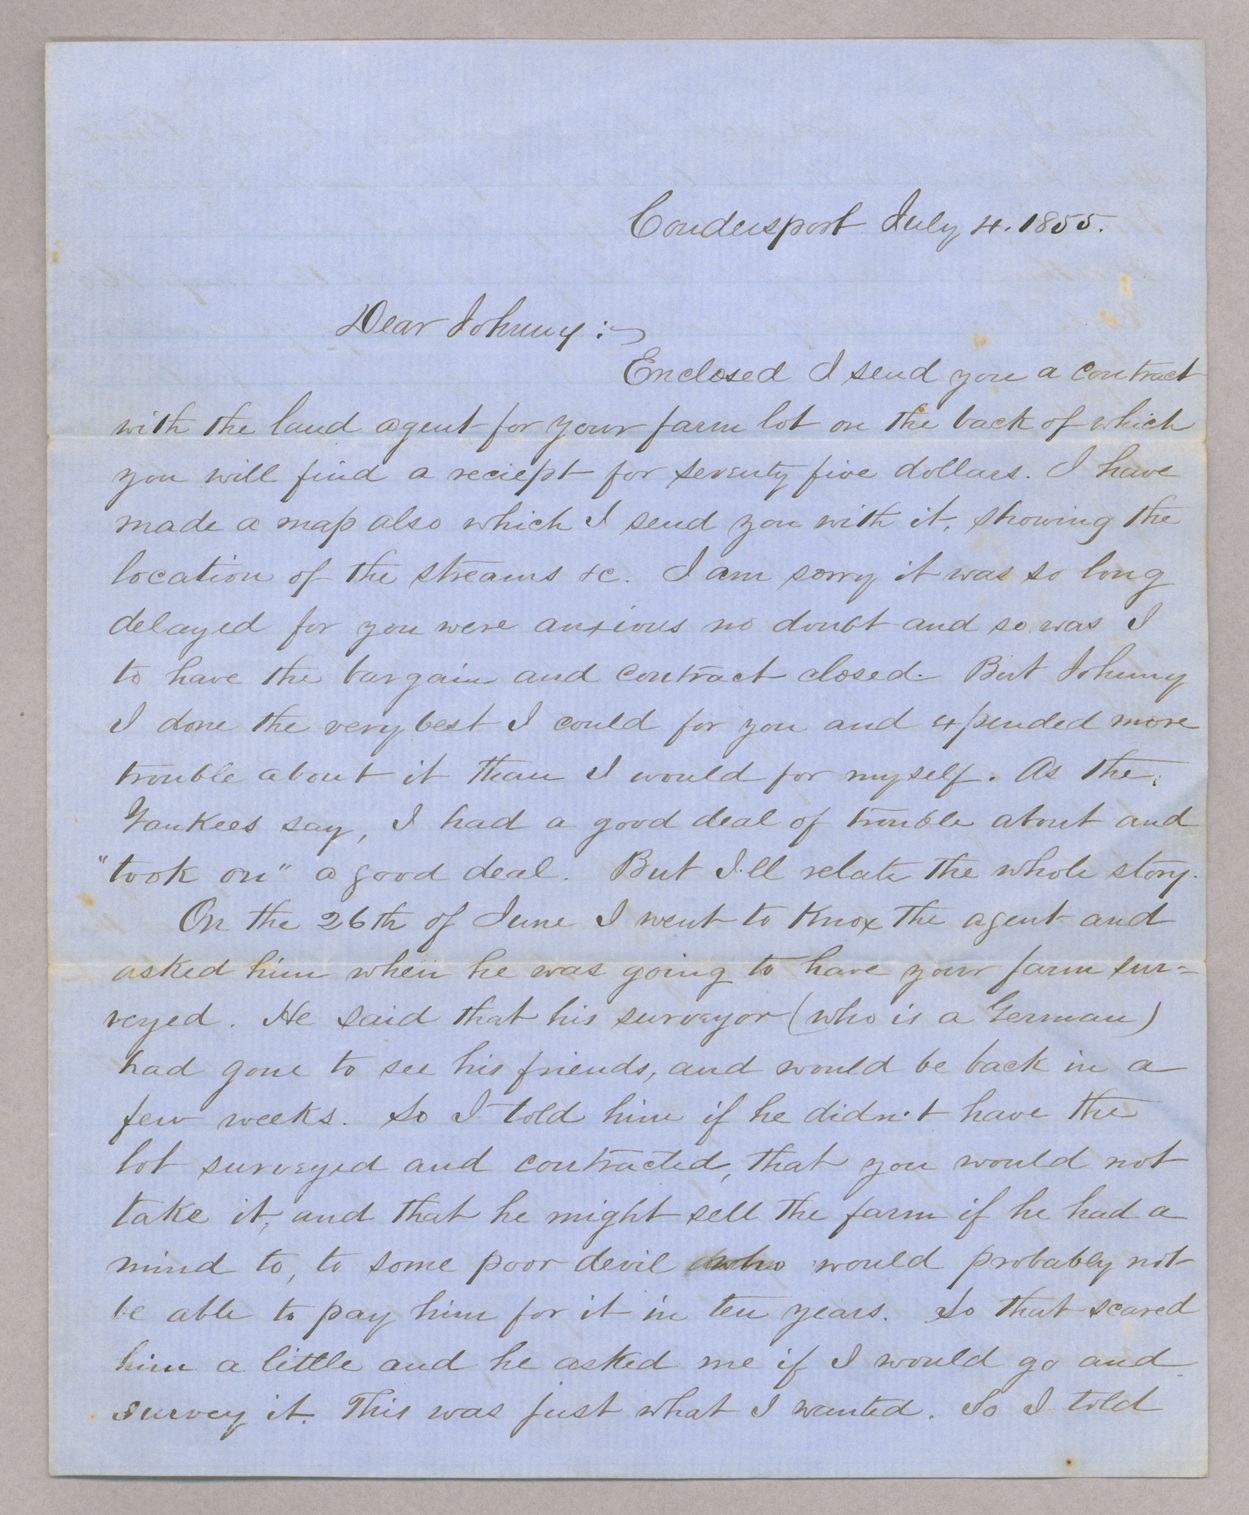 Letter. Hugh Young, Coudersport, Pennsylvania, to "Dear Johnny" [John E. Brownlee], n. p., Page 1